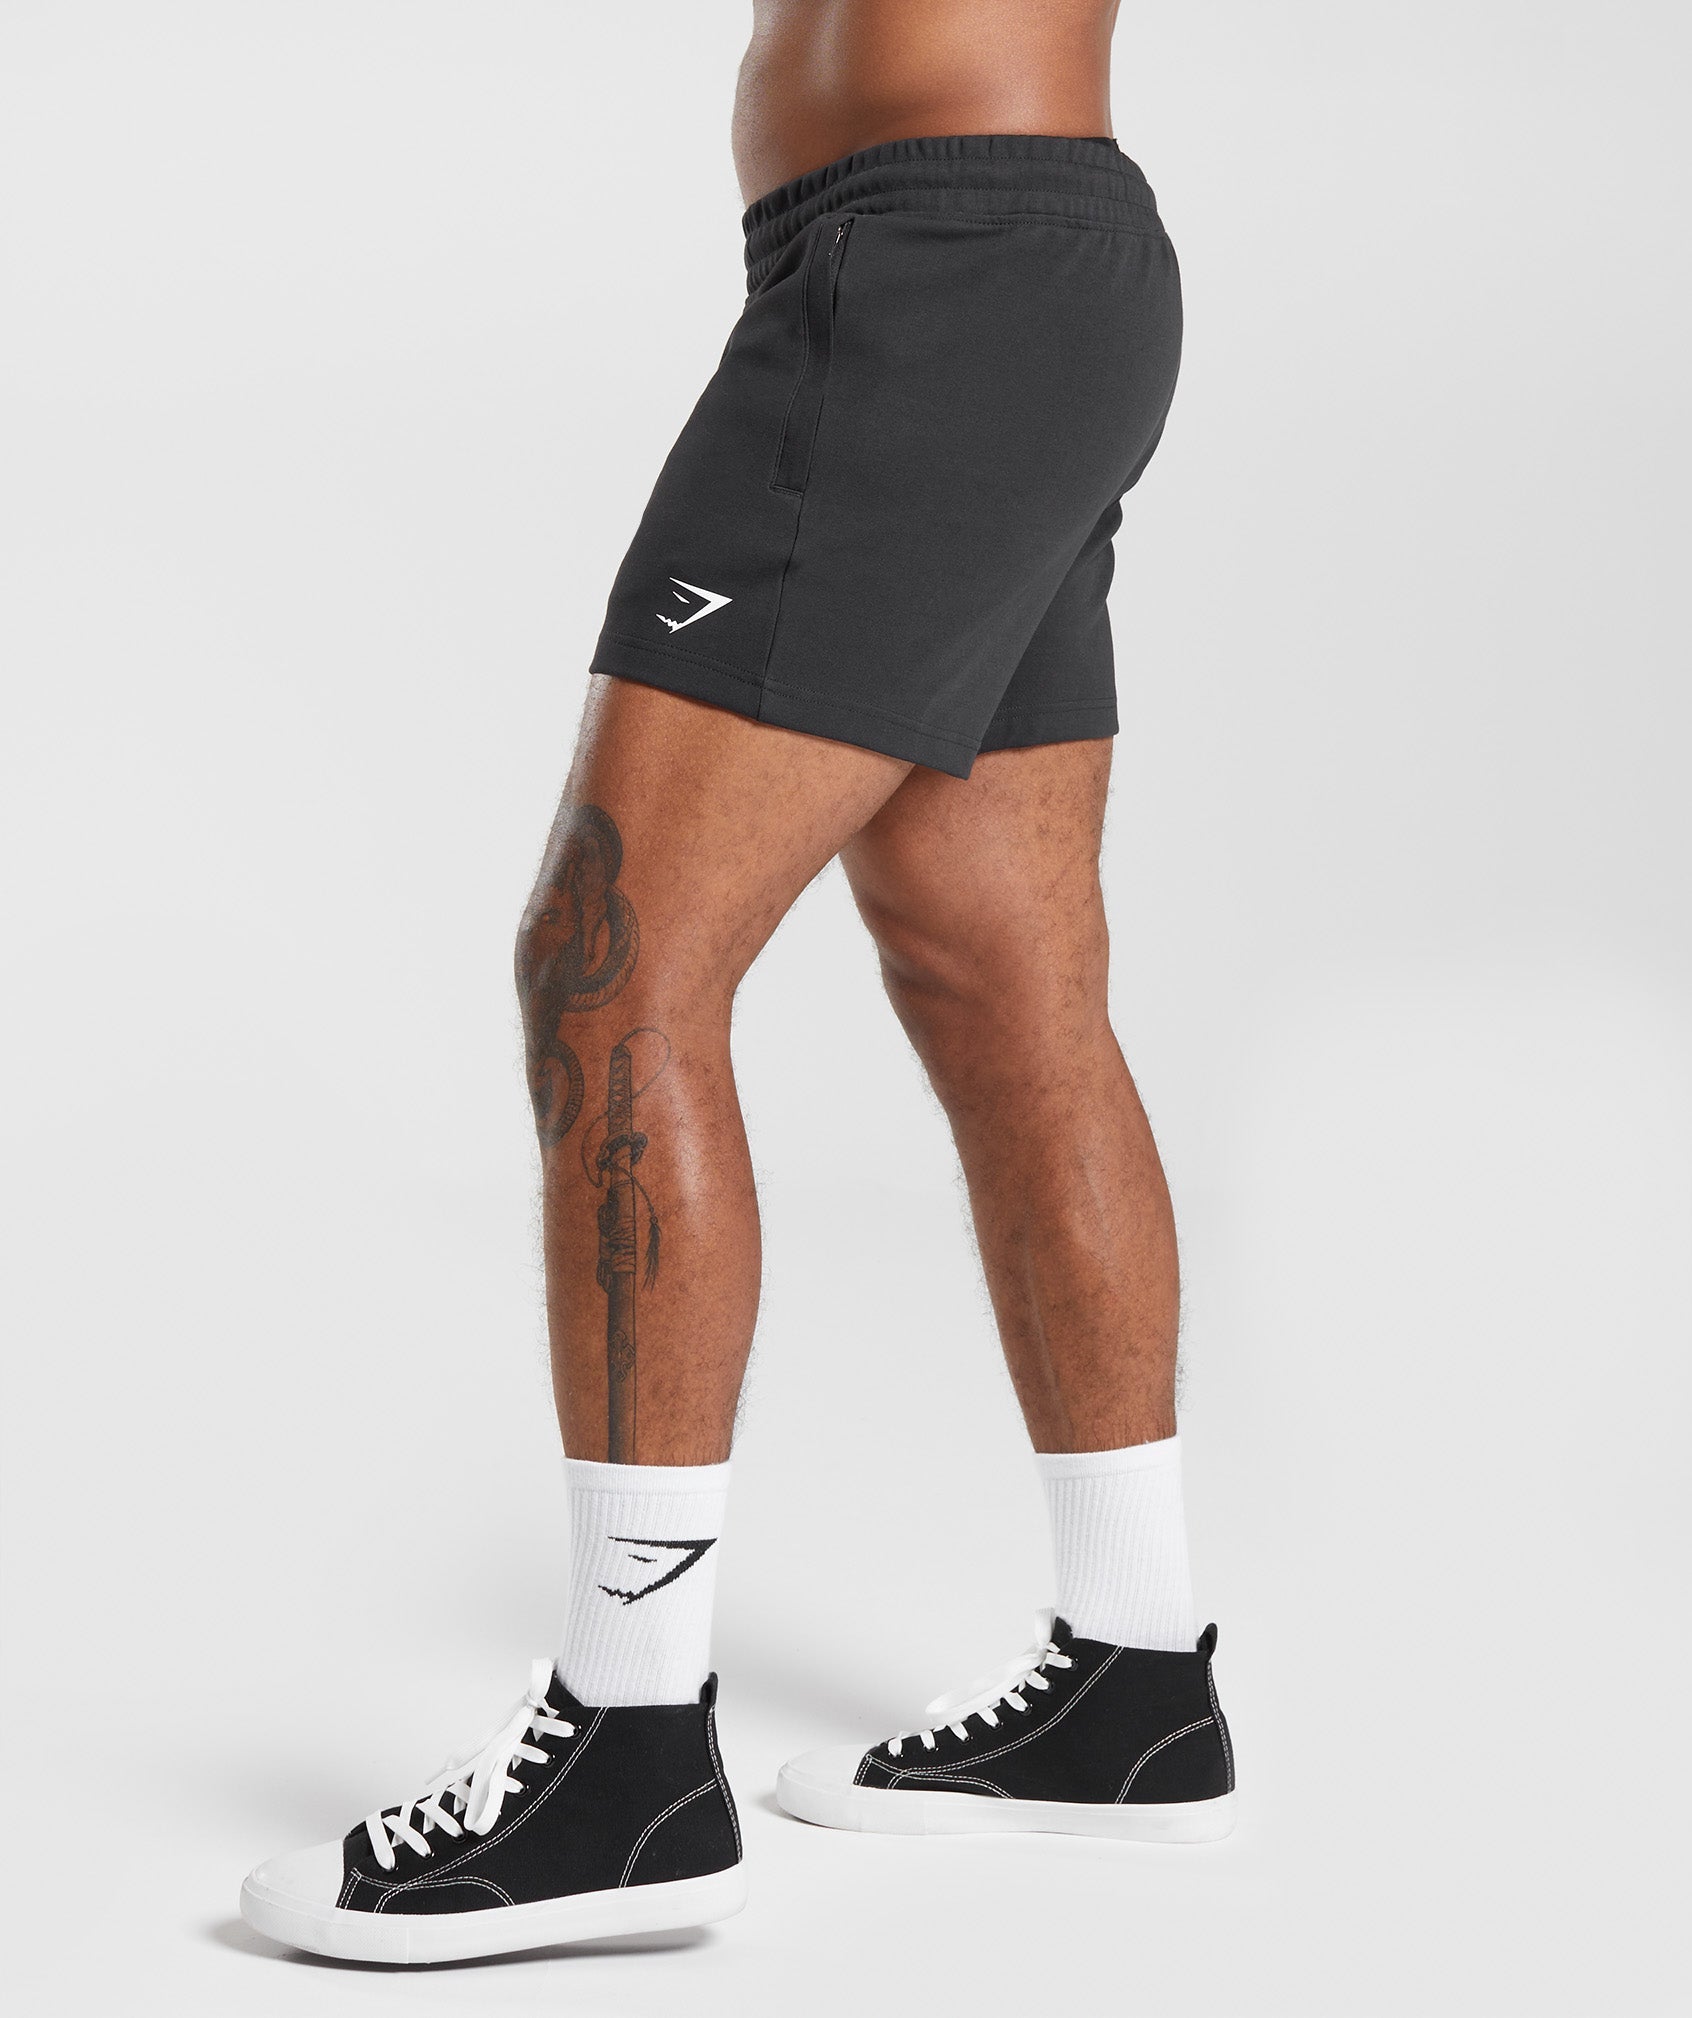 React 5" Shorts in Black - view 3